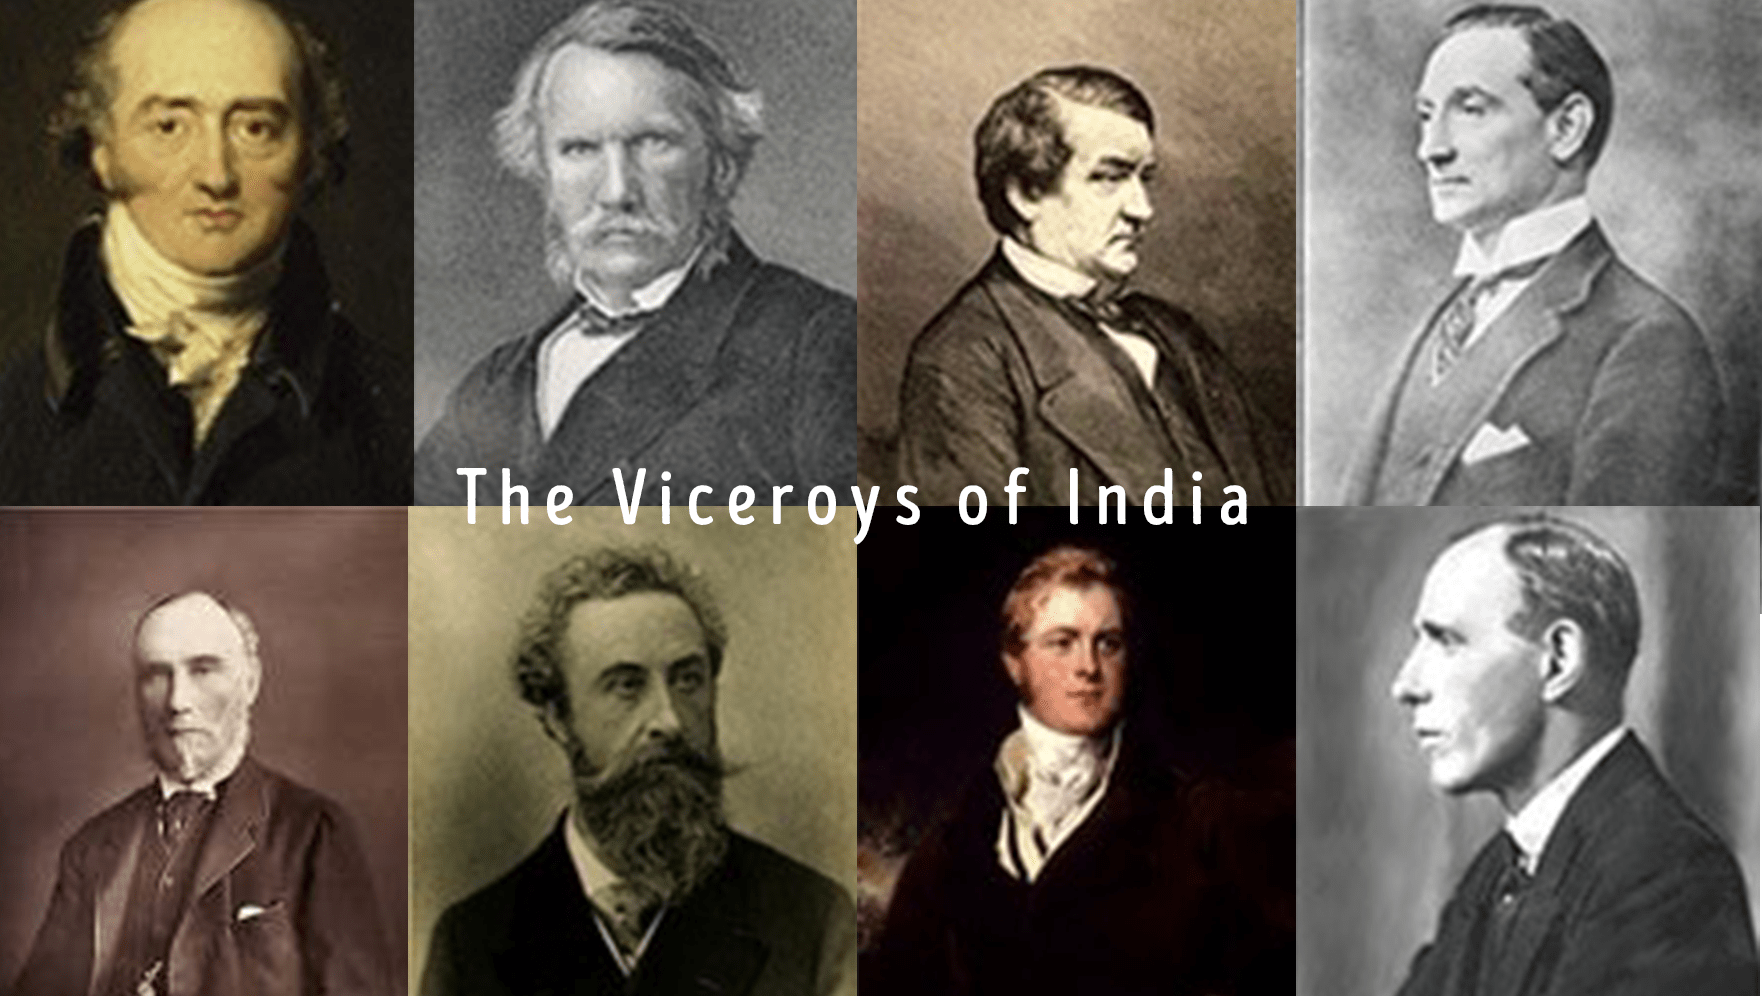 The Viceroys of India - Mobisium